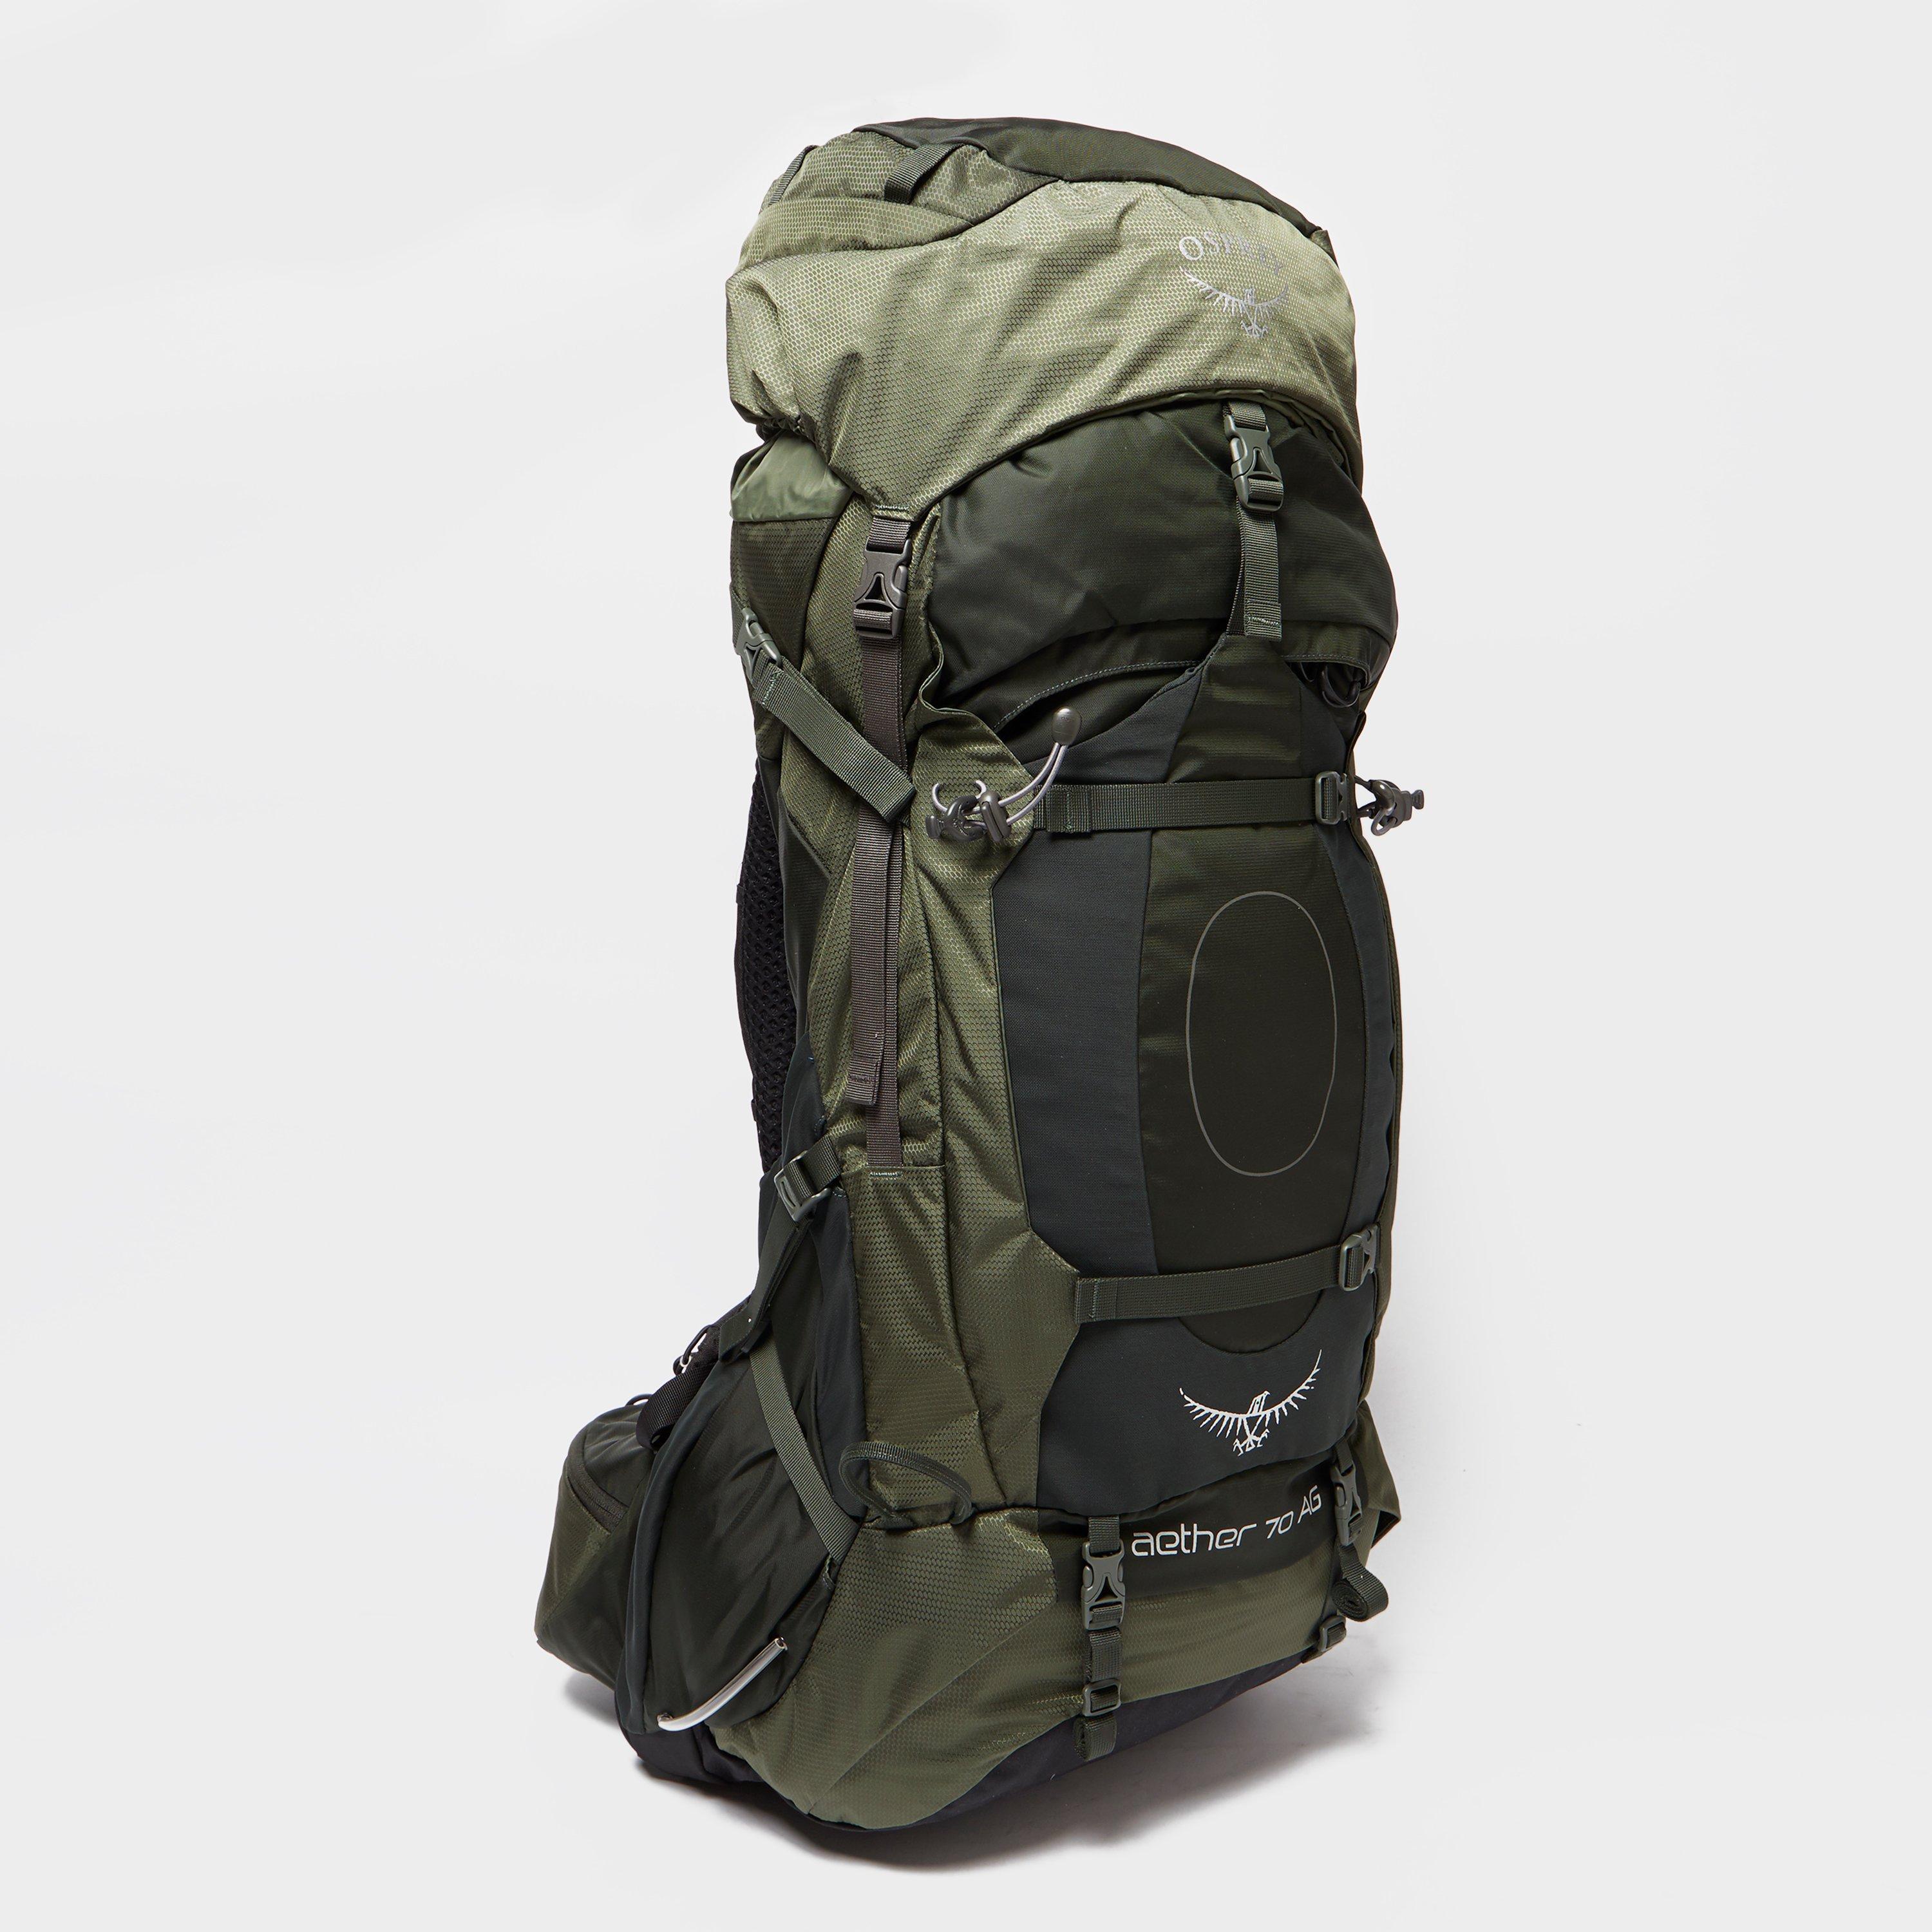 Osprey Aether AG Rucksack - Green, Green Review - Adventure